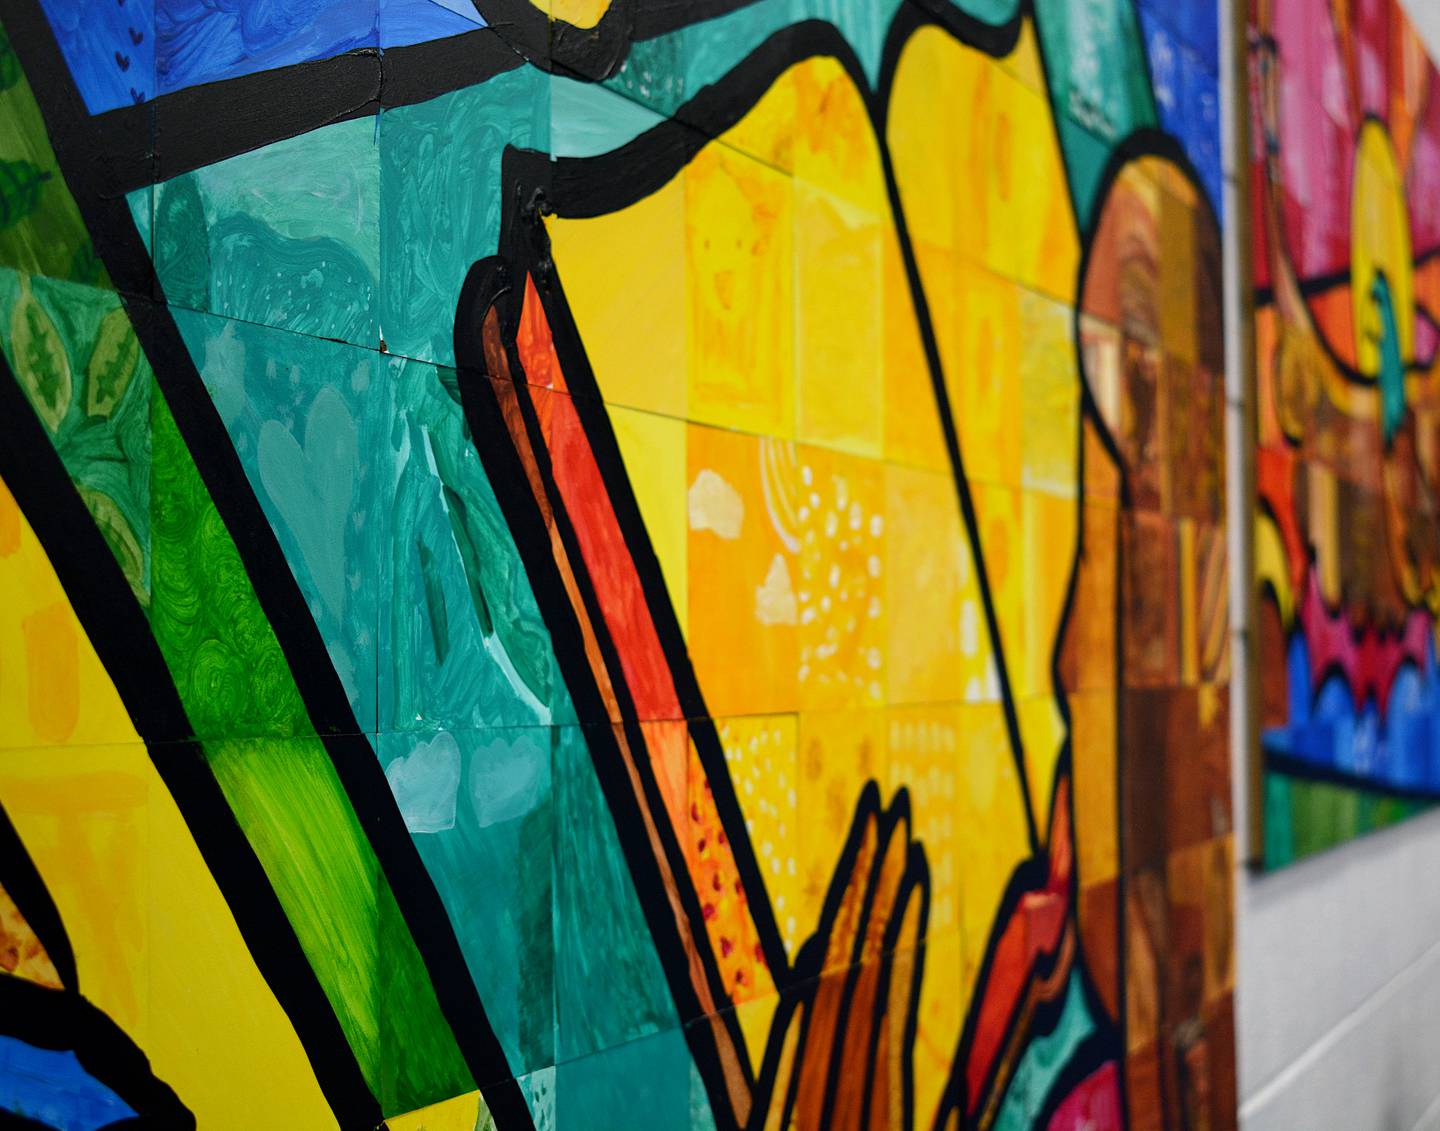 A close look at one of the murals. Each square was painted by a student or member of staff, giving them individual creativity before it is installed together as a completed mural.